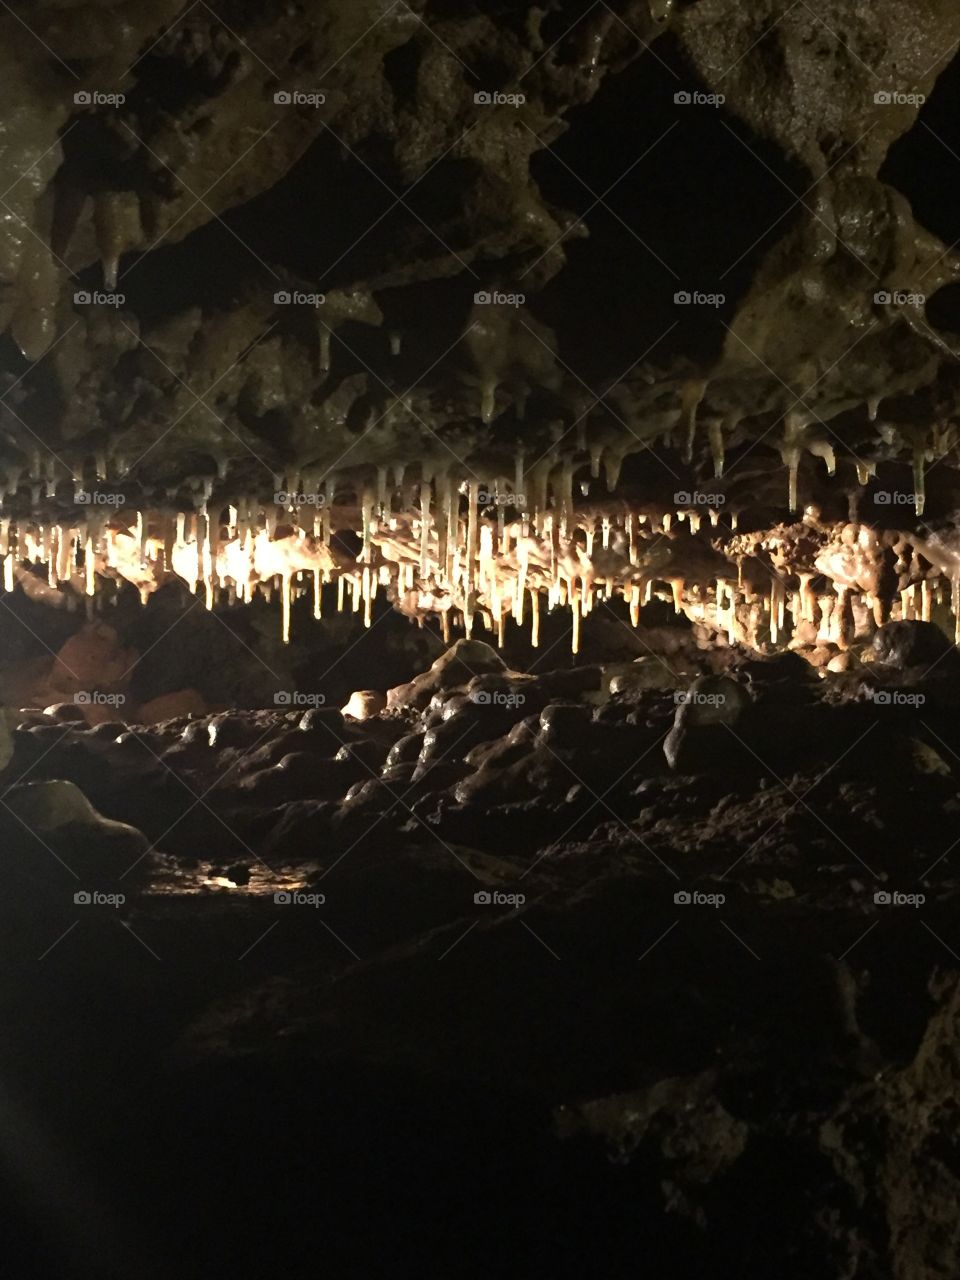 A dark gap in a cave wall full of glistening  stalactites and stalagmites beautifully contrasted with the dark shadows between